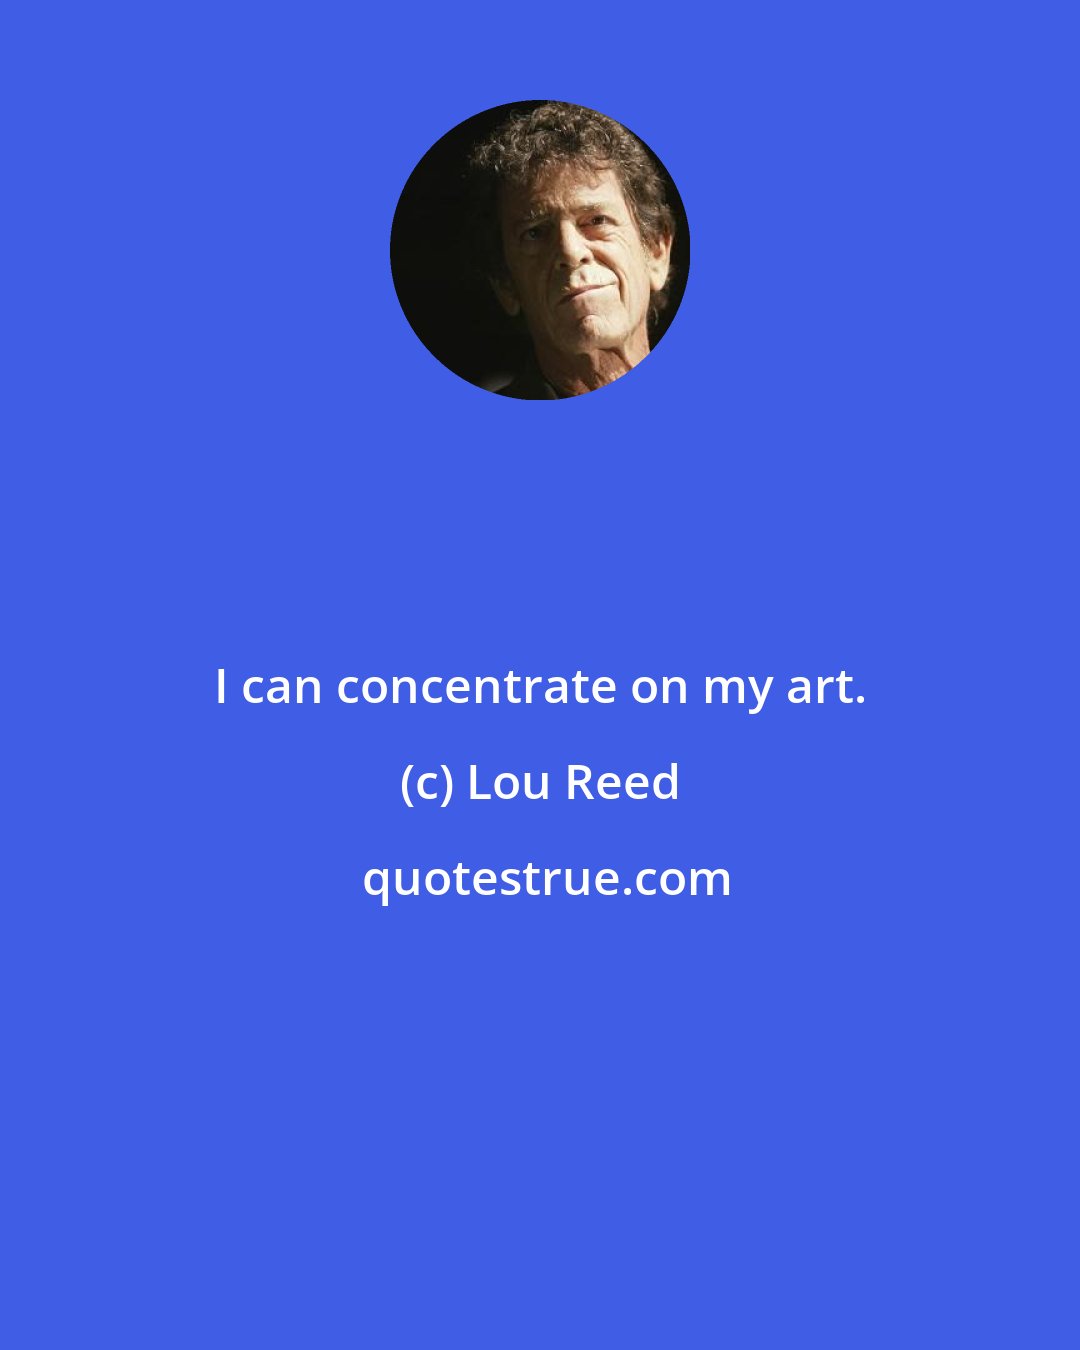 Lou Reed: I can concentrate on my art.